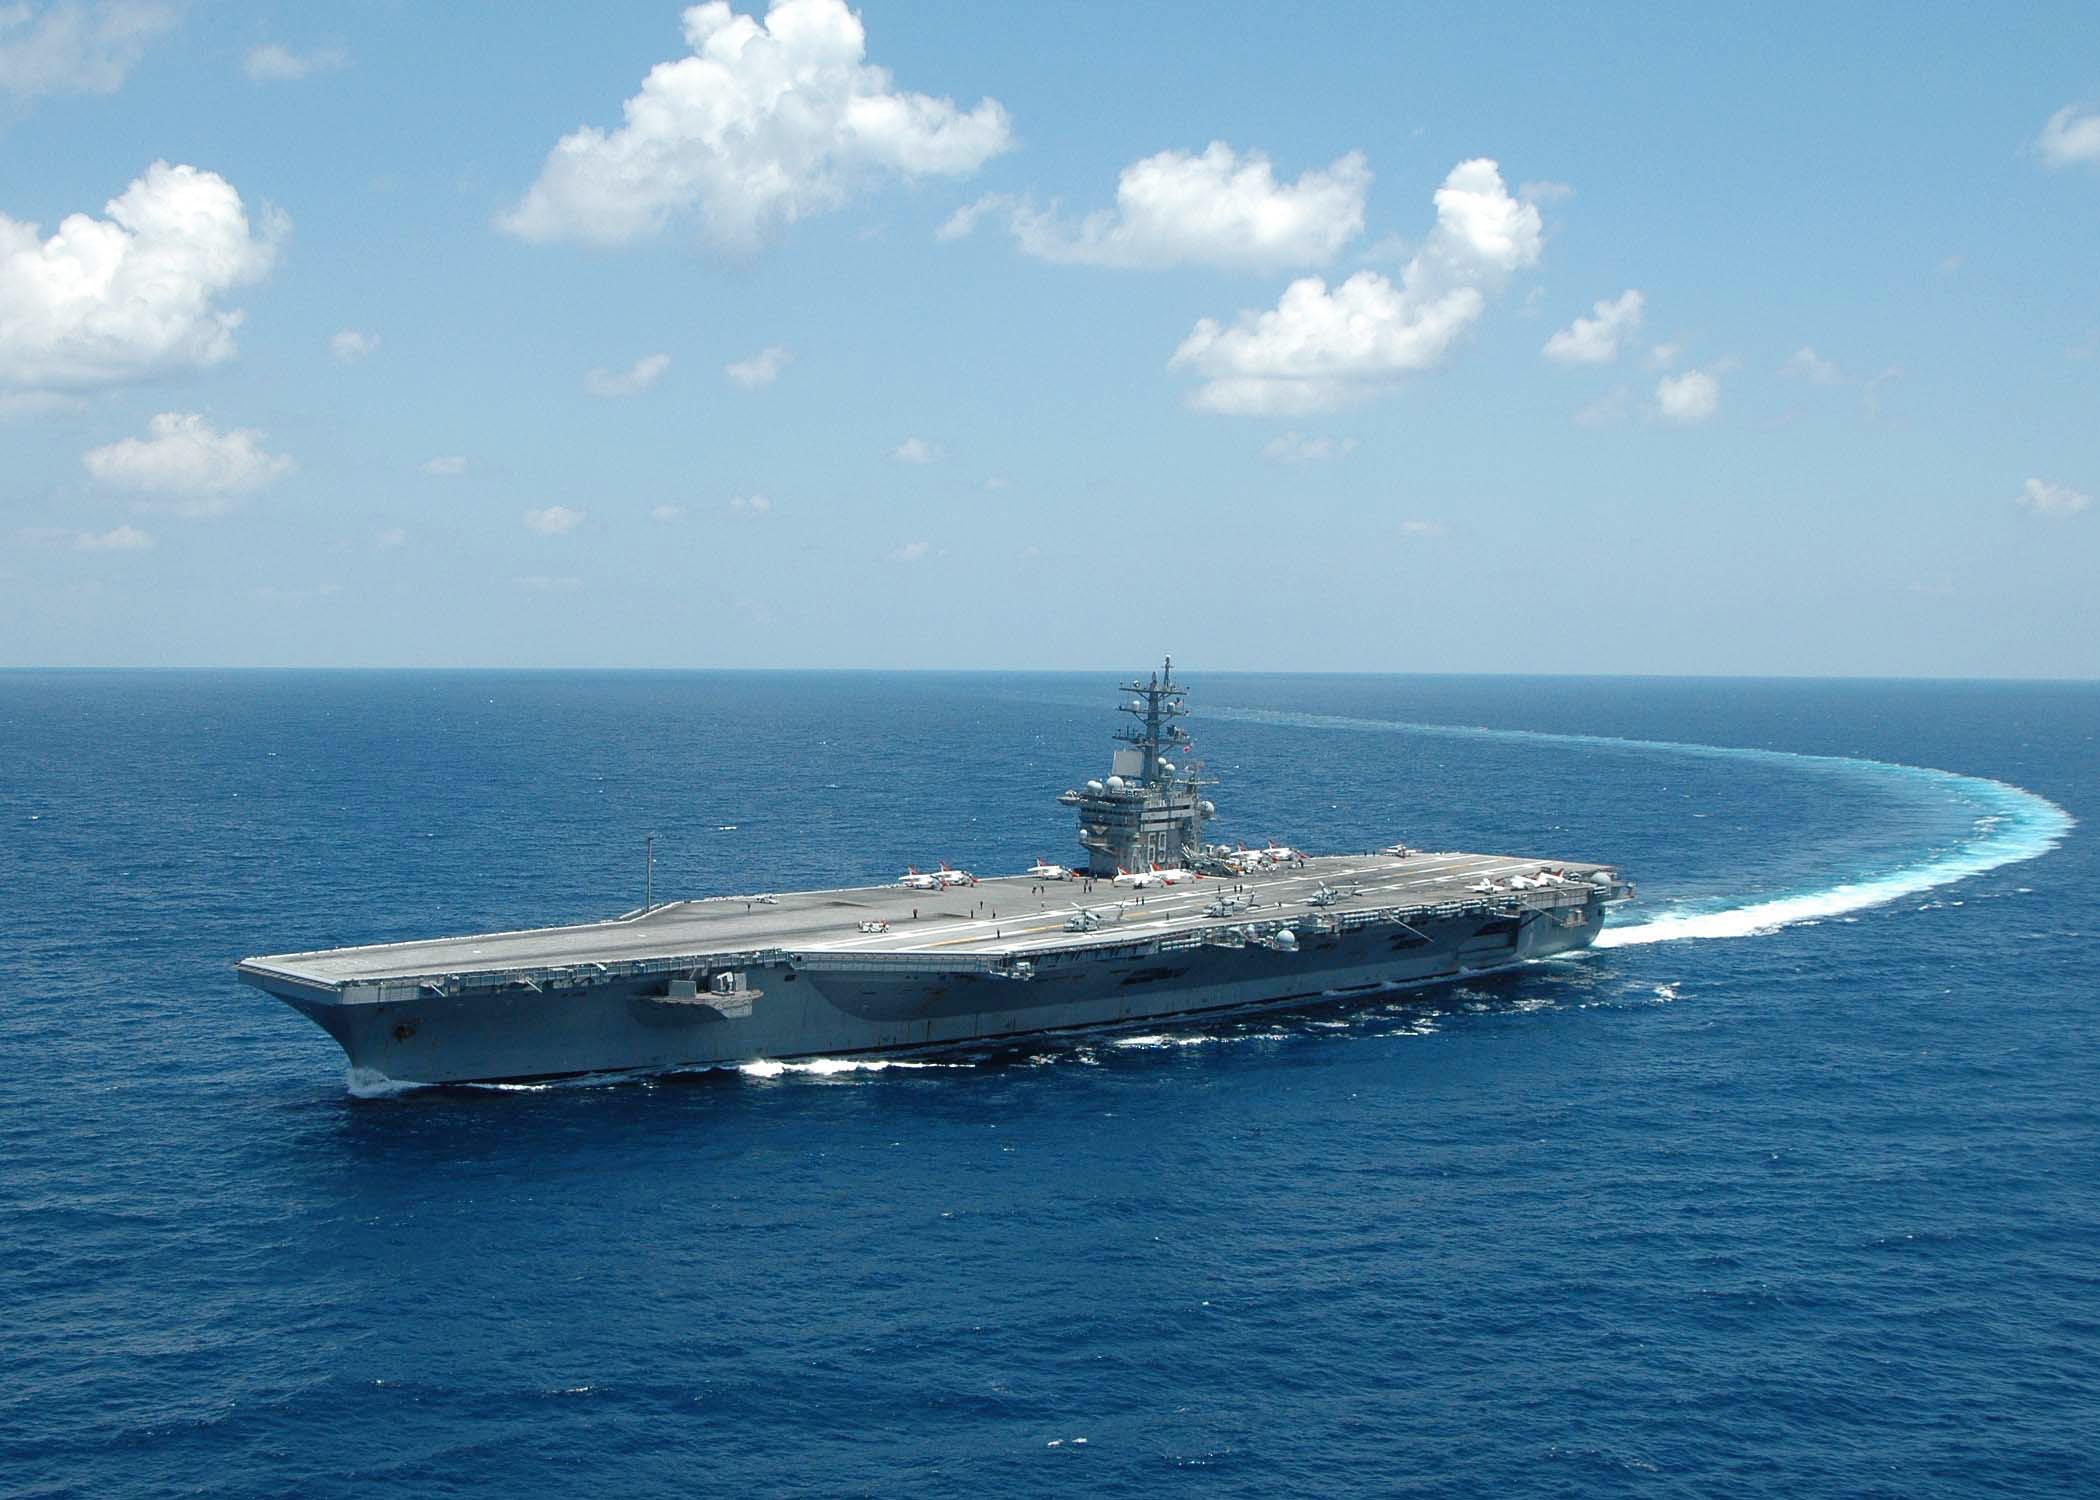 USS Dwight D Eisenhower steaming in the Atlantic